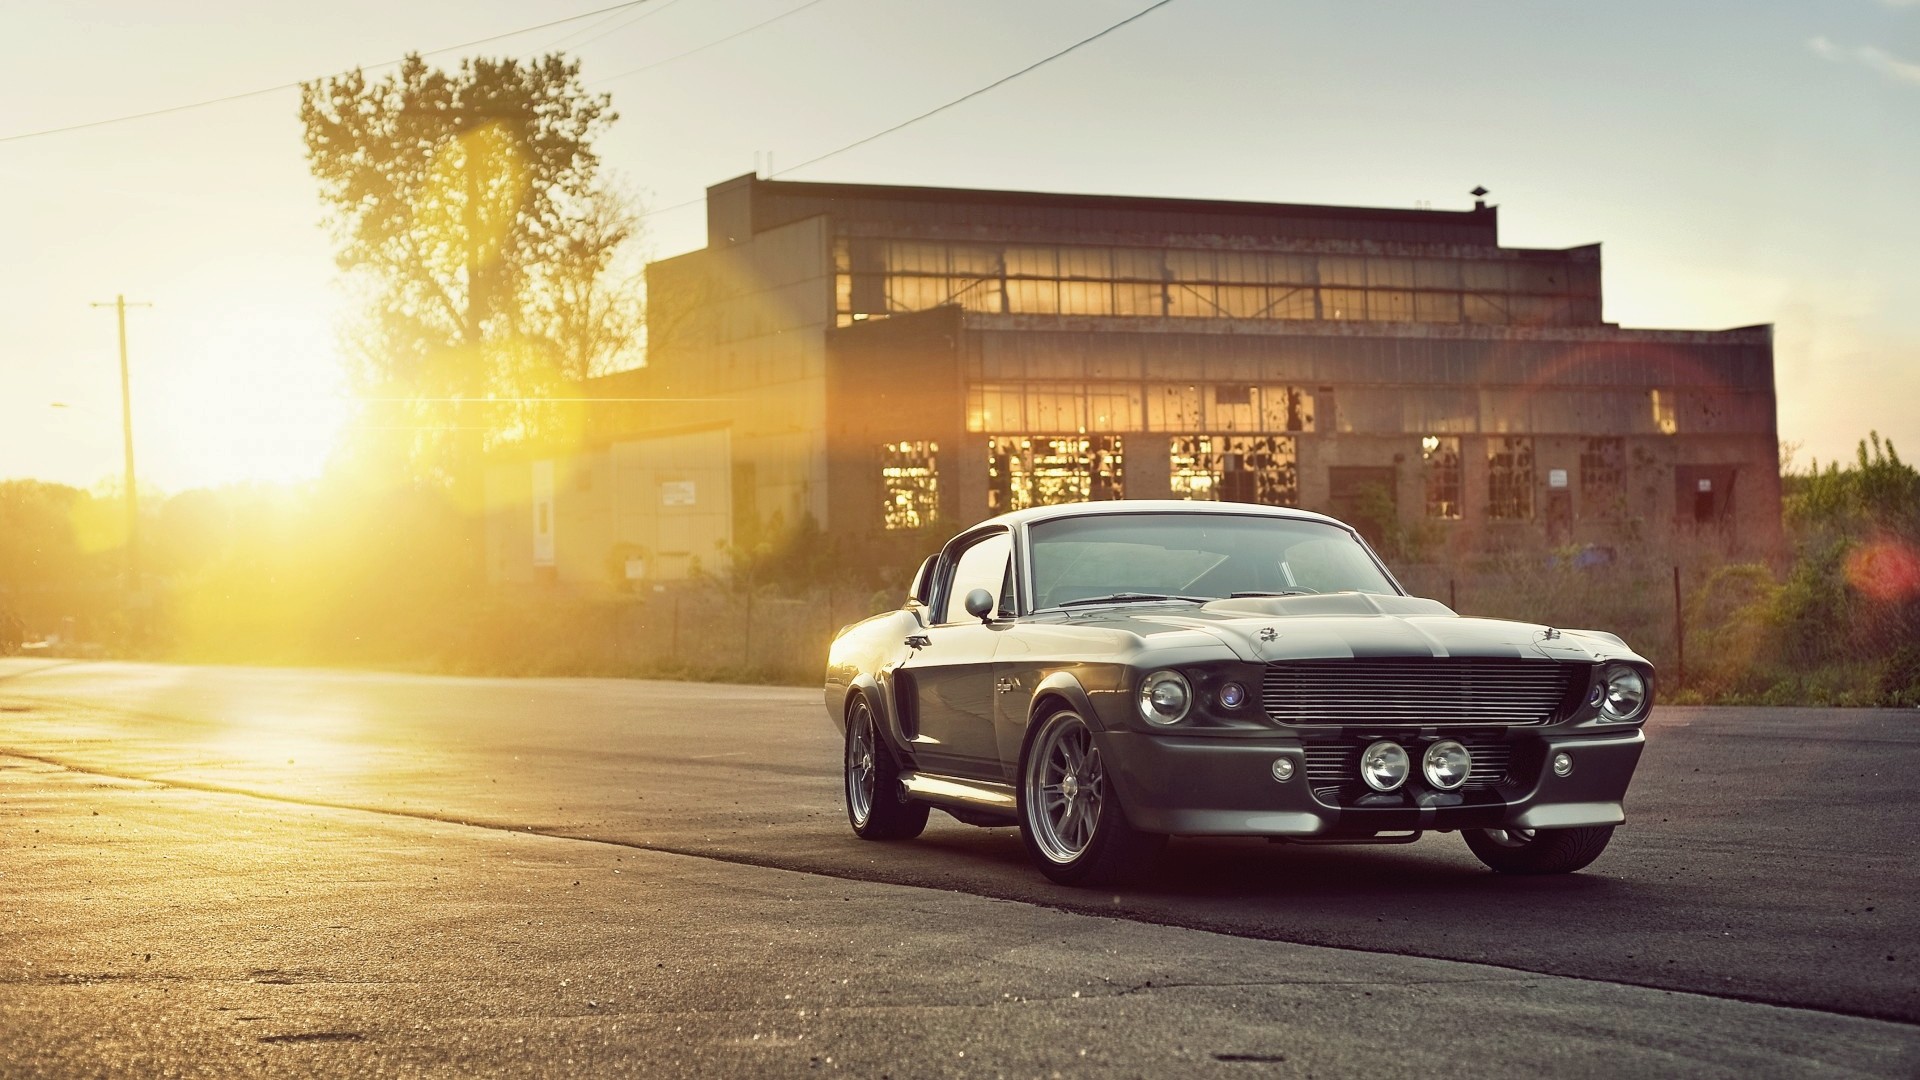 Car Shelby Rims Silver Eleanor Car Ford Mustang Shelby GT500 Eleanor Sun Sunlight Yellow 1920x1080